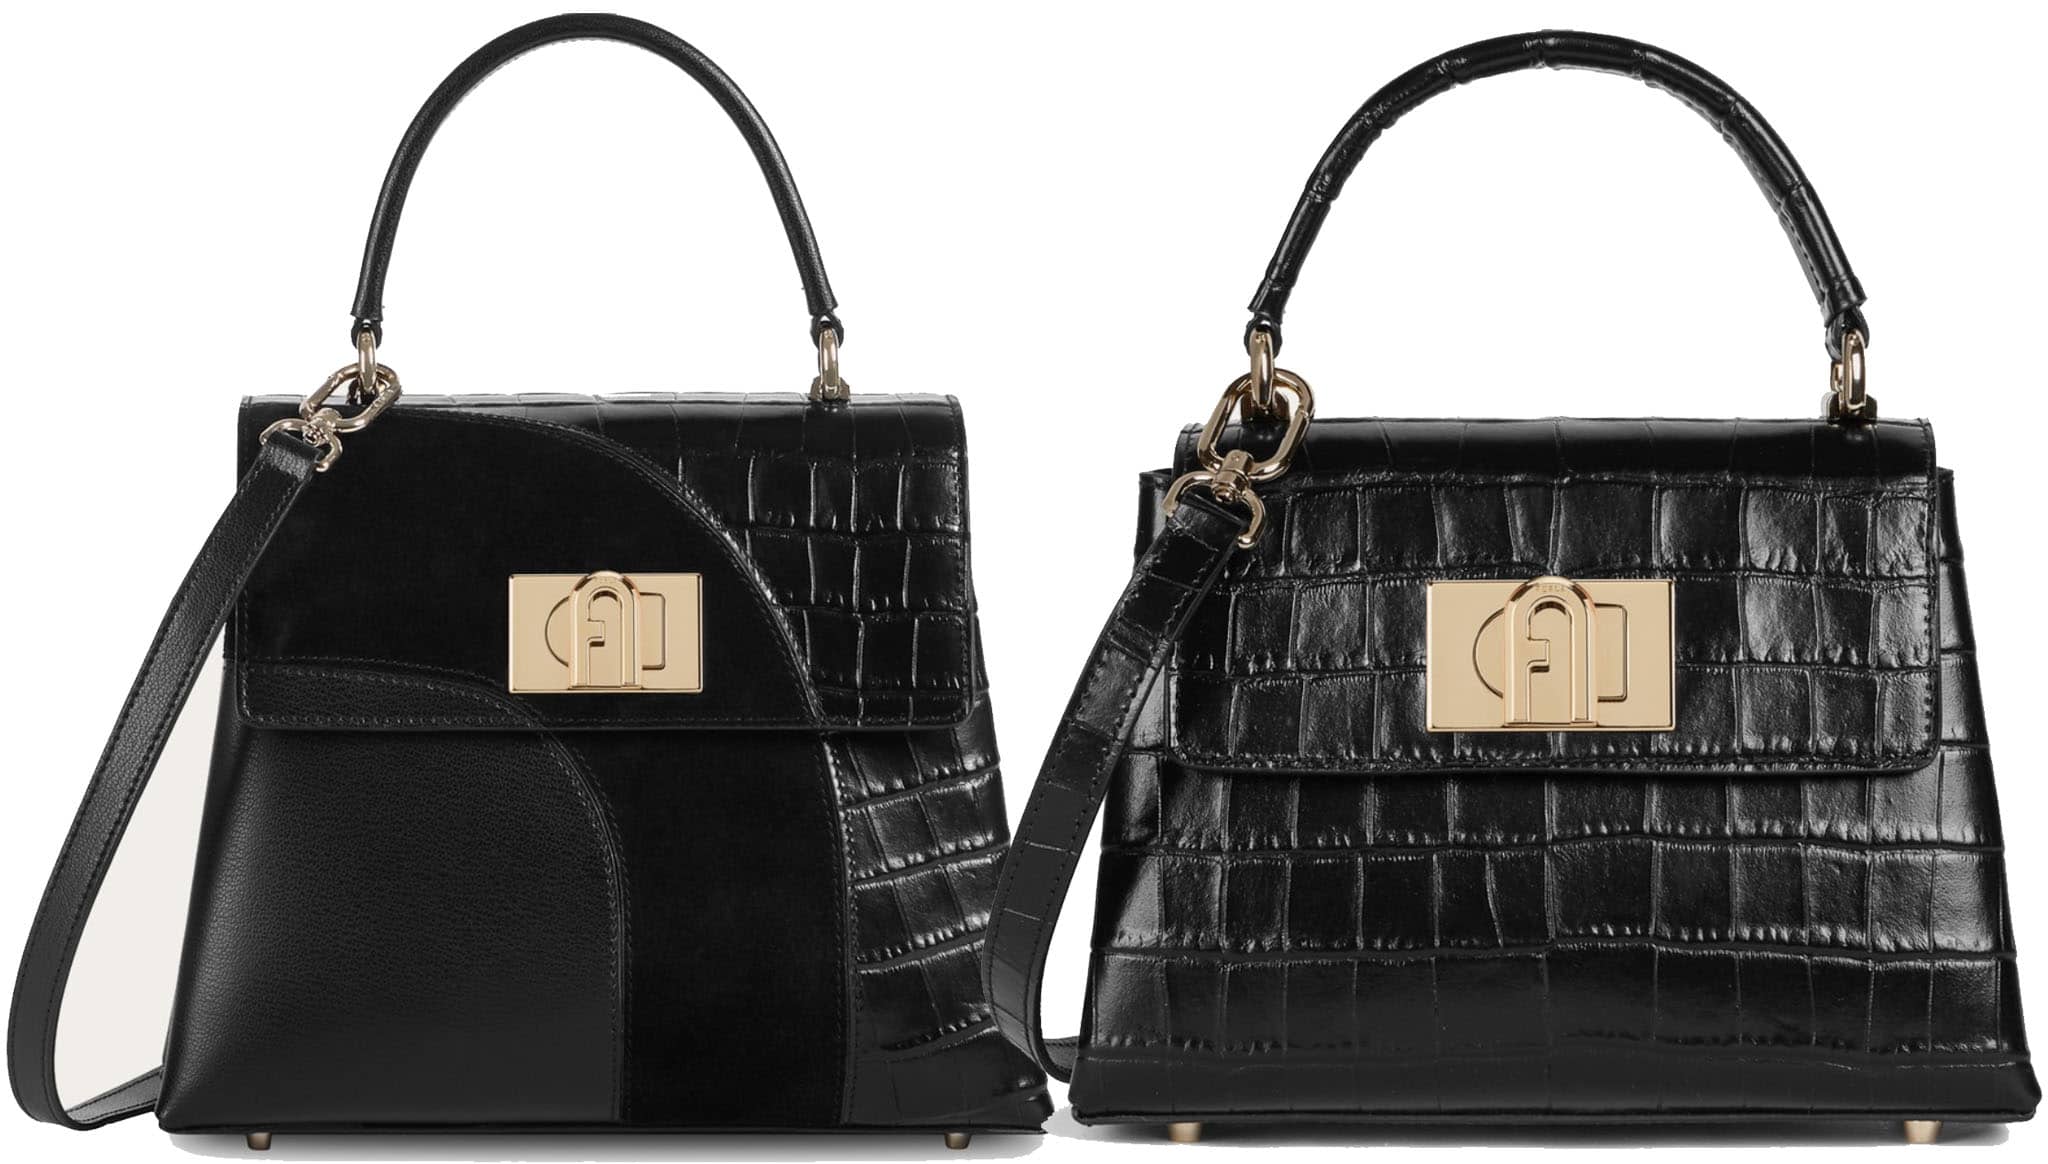 Made from croc0skin calfskin leather, the 1927 features a sophisticated look with a metal Arch logo turnlock closure